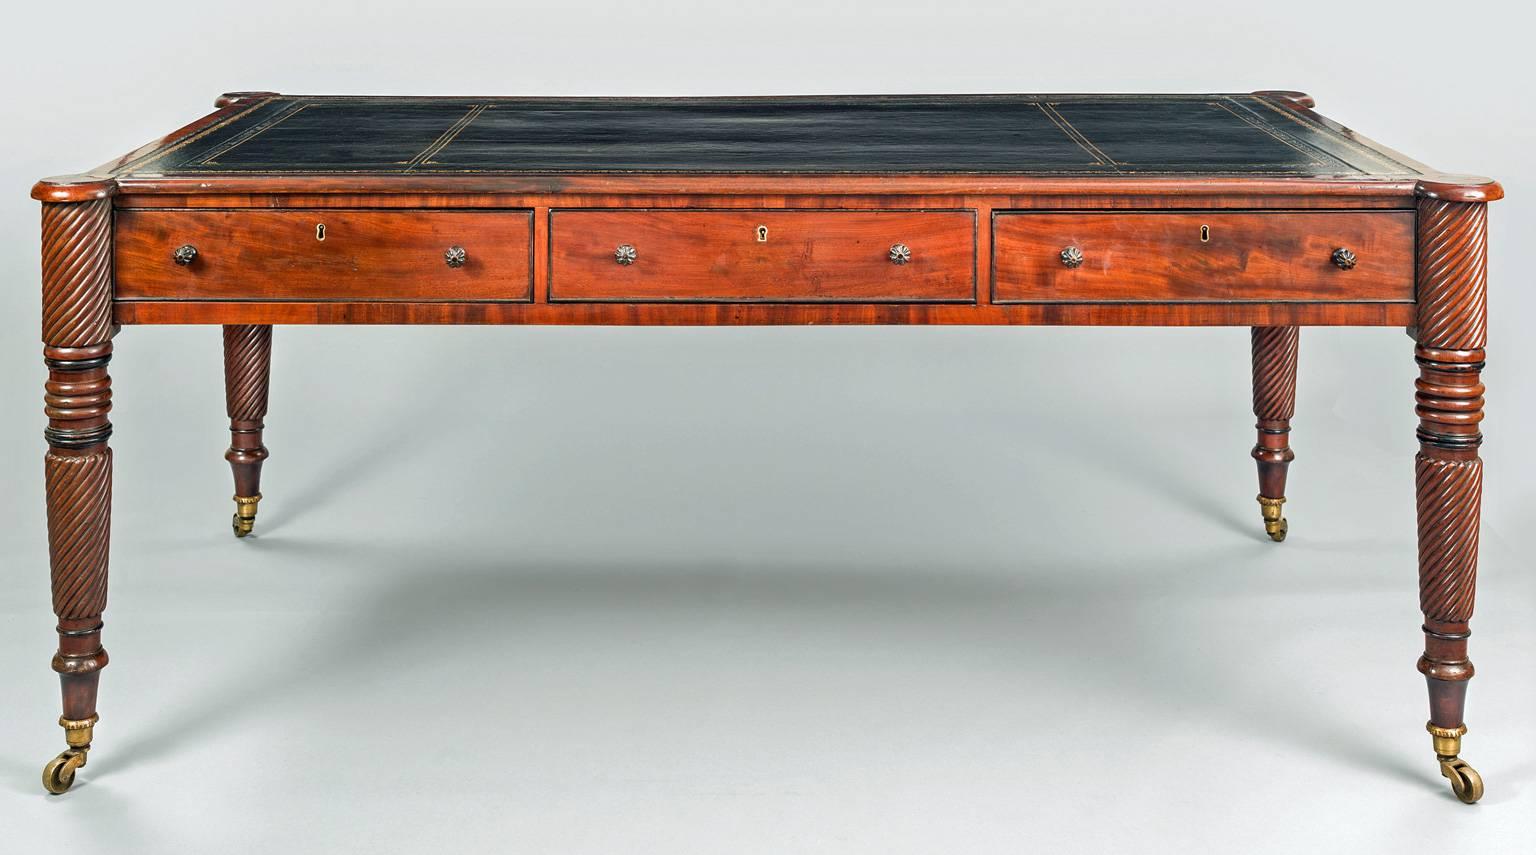 Antique large Regency mahogany partners writing table, the top with unusual projecting cookie-cutter corners and black gilt-tooled leather insert above three drawers on each side with melon-shaped knobs, spiral and ebonized ring turned legs ending